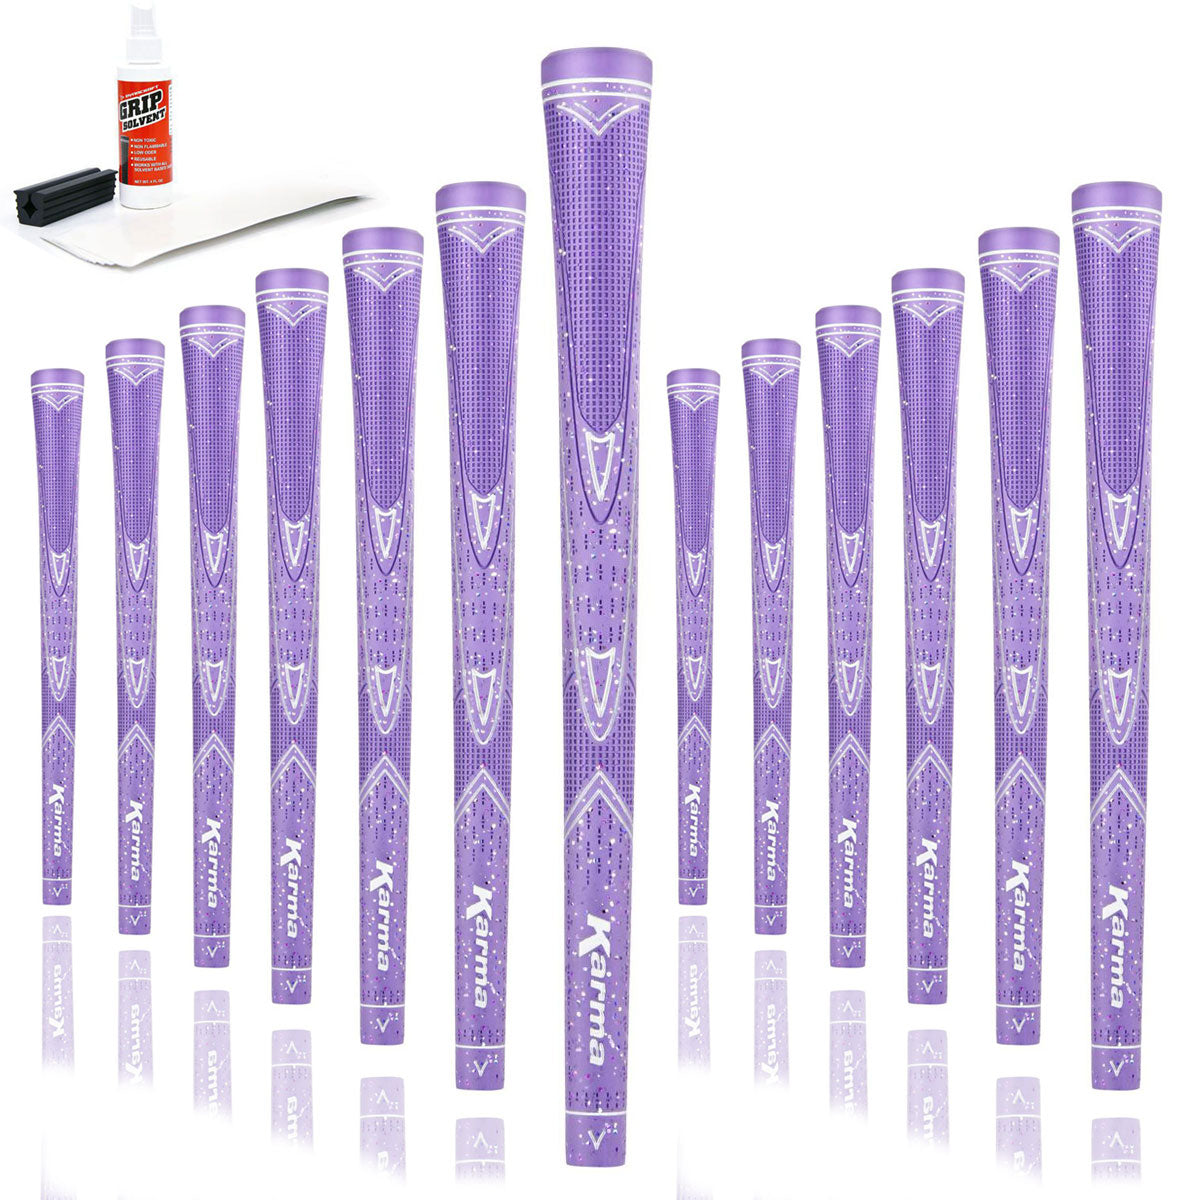 13 Karma Sparkle Purple golf grips, golf grip tape strips, bottle of grip solvent and rubber shaft clamp